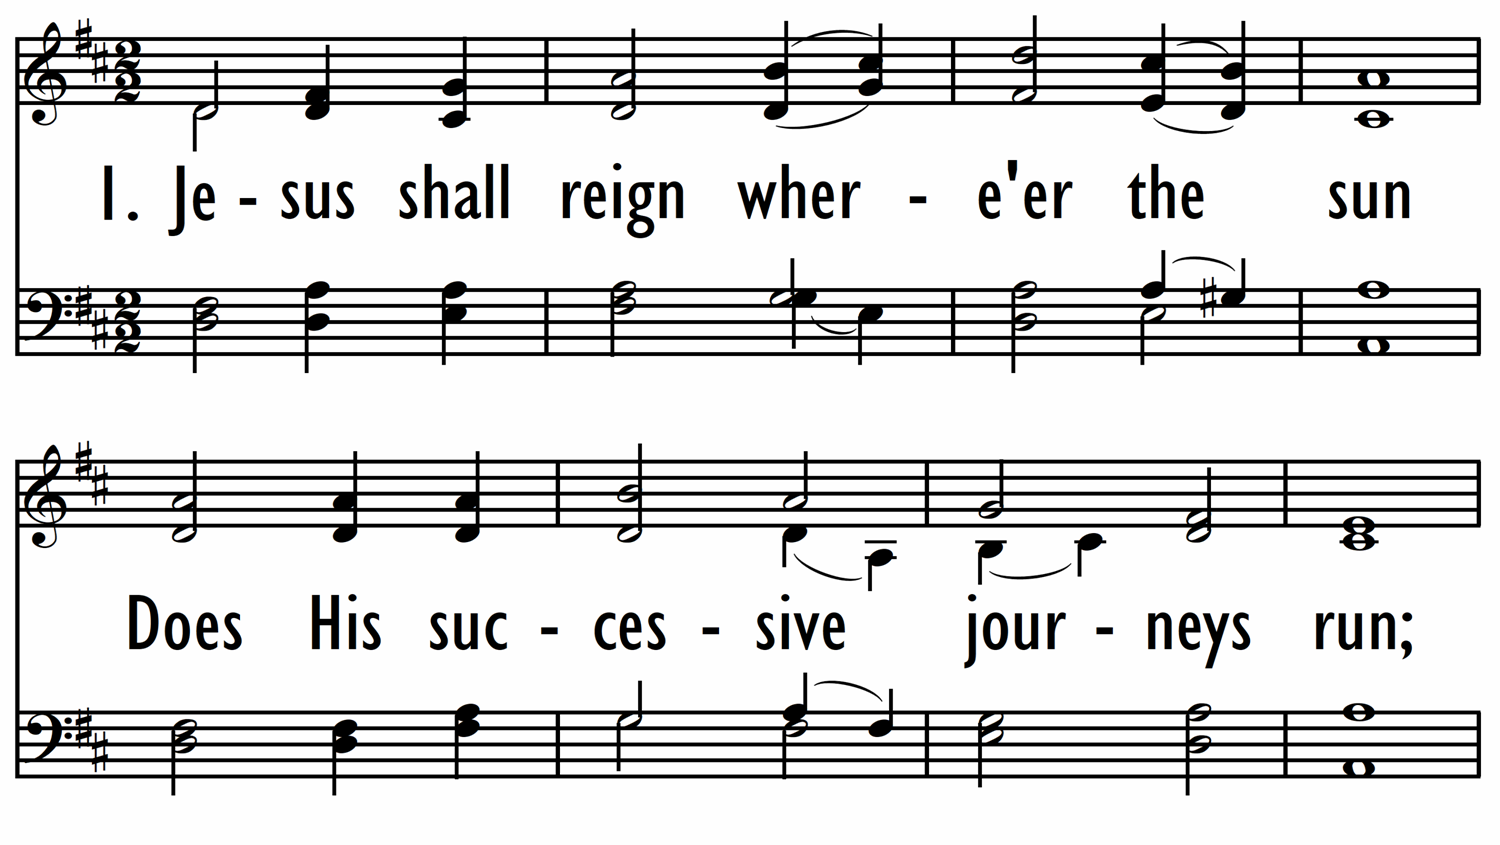 JESUS SHALL REIGN - with descant-ppt